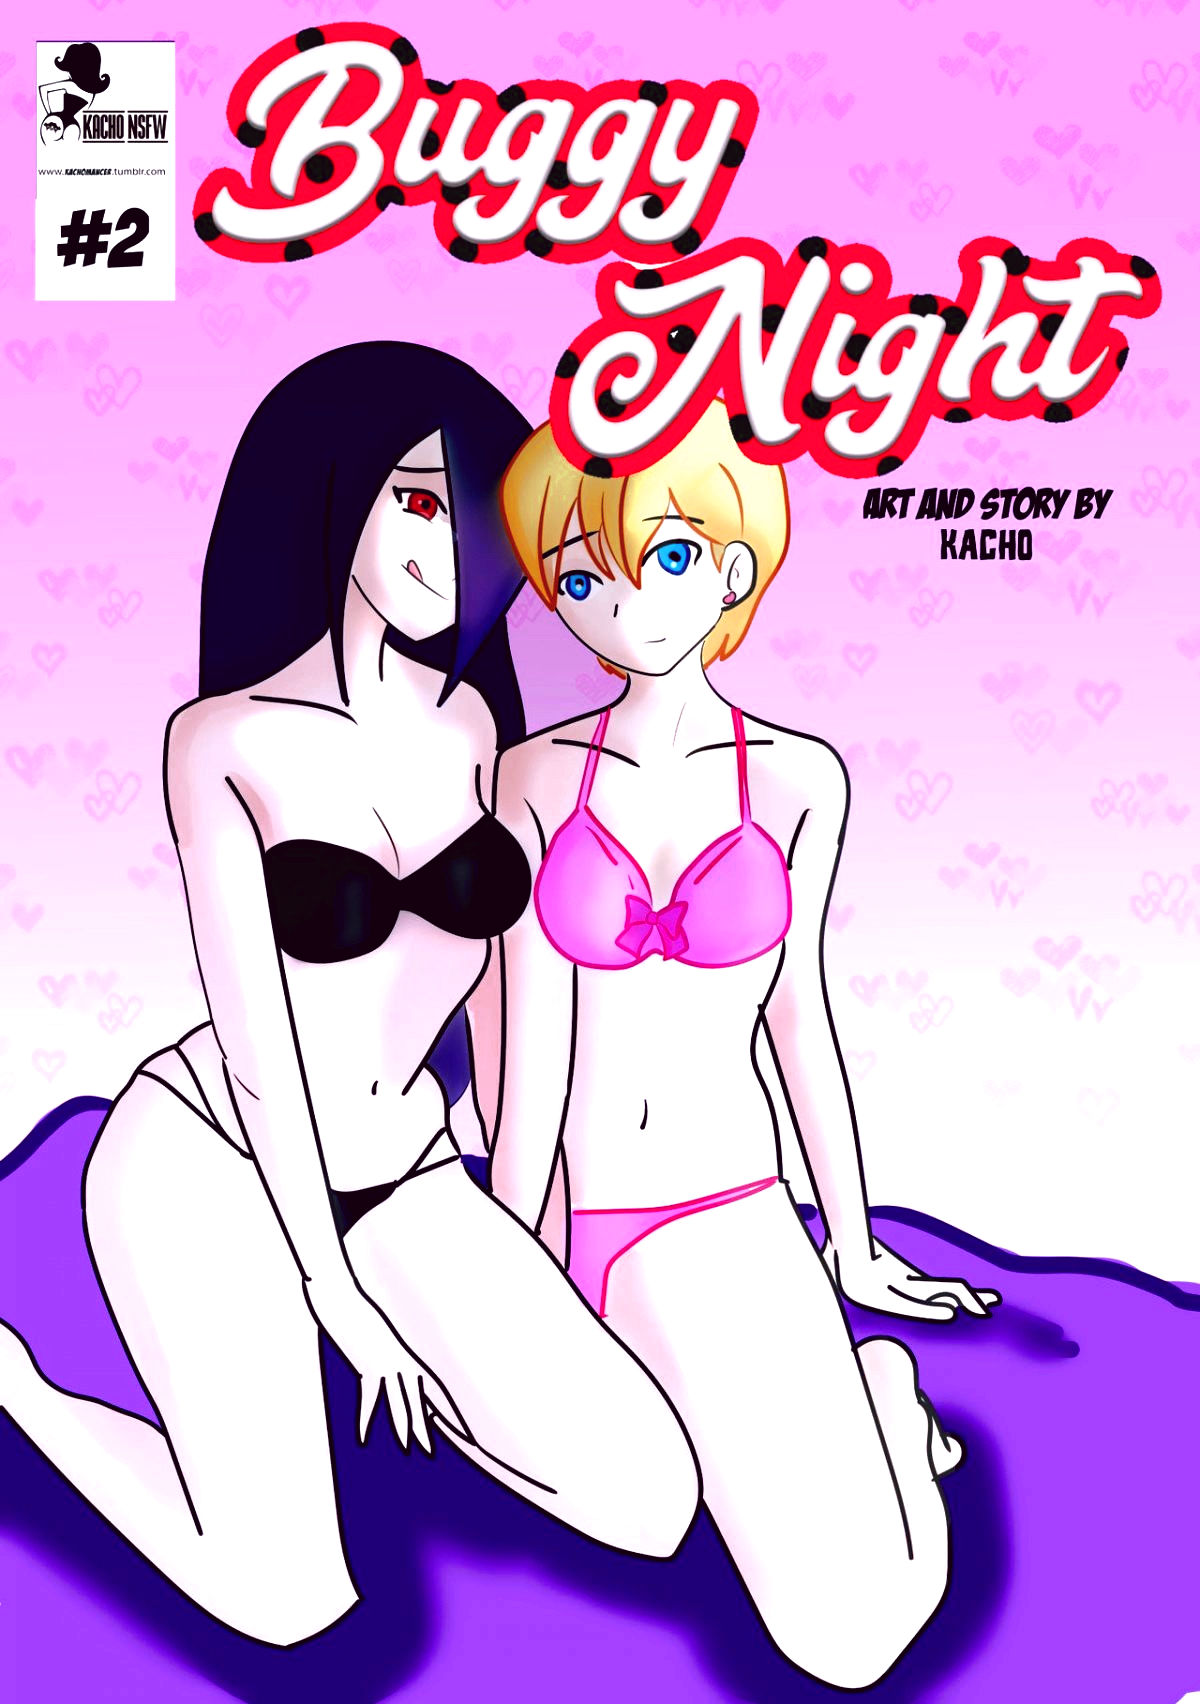 Buggy night 2 porn comic picture 01 1